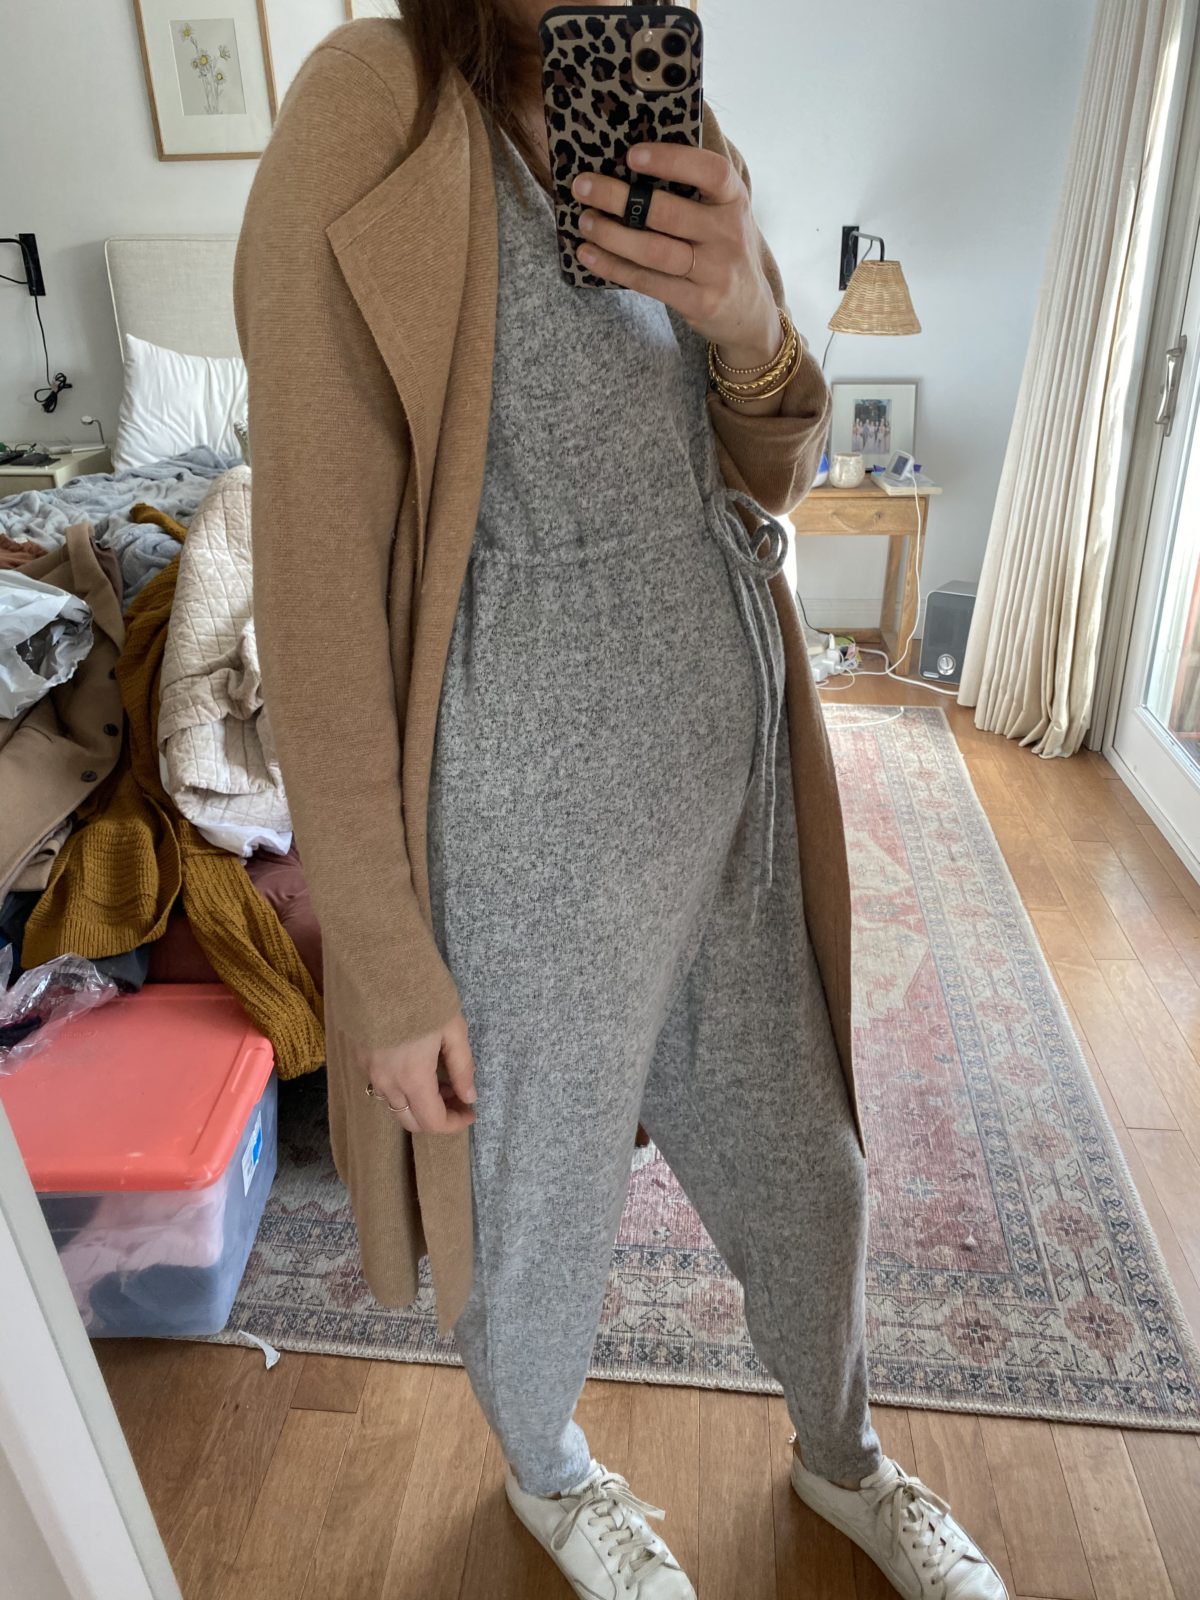 20 Maternity Outfit Ideas For Winter - The Mama Notes